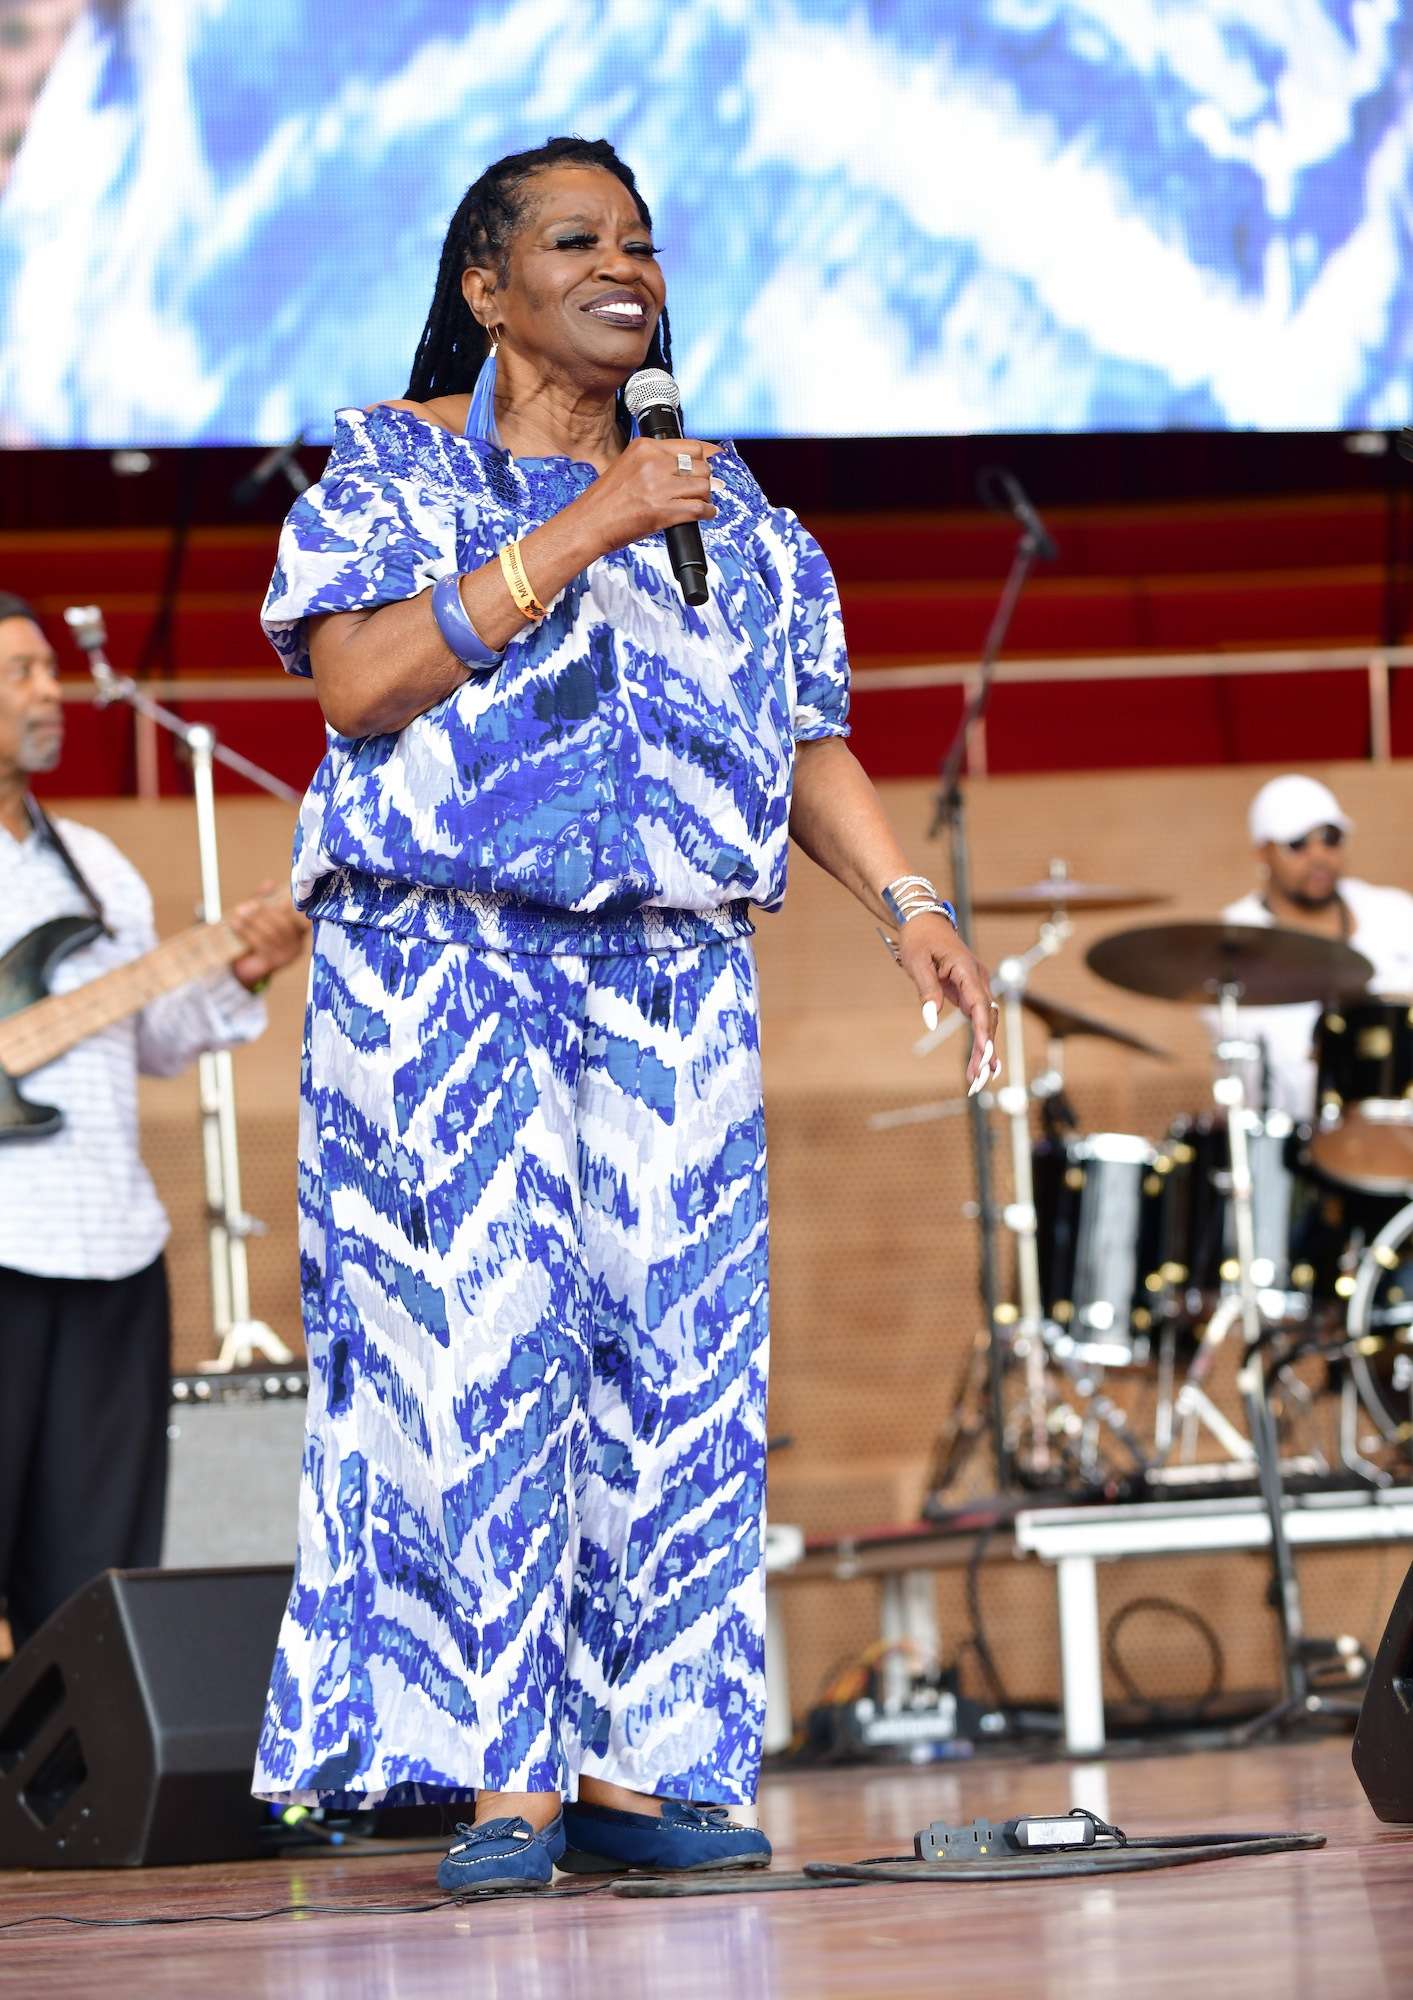 Women In Blues Live At Chicago Blues Fest [GALLERY] 11